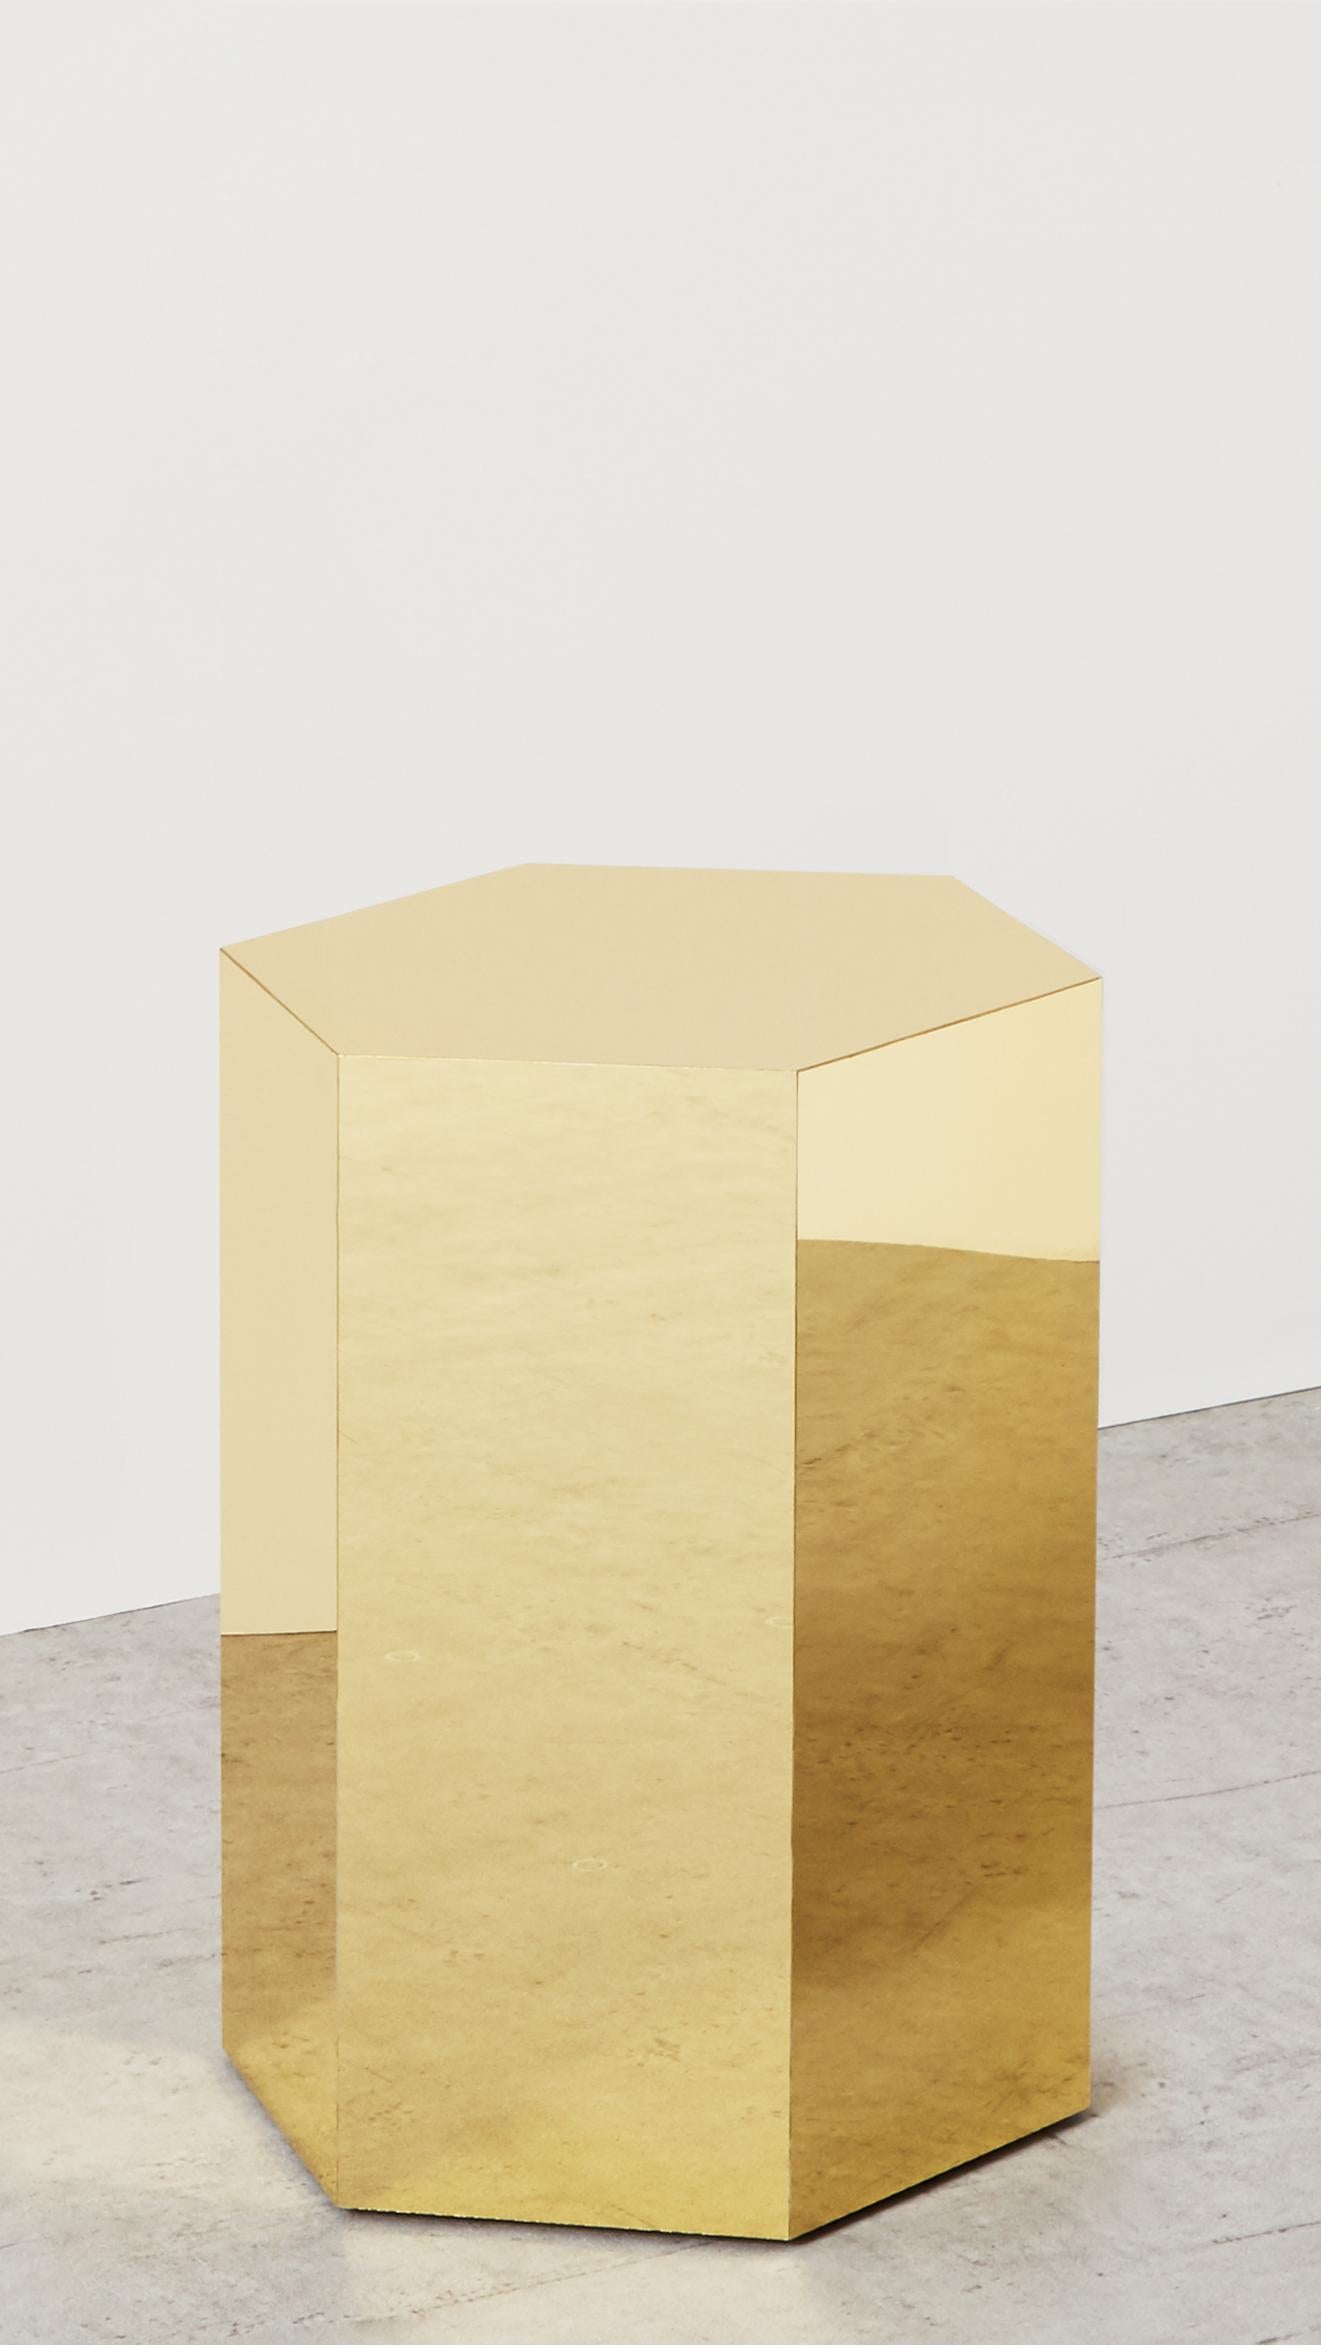 Askew side table, Arielle Lichten 

A brass finish side table in a hexagonal shape.

Measures: 12” W x 12” L x 16” H

Material: Brass

Custom Sizes and finishes available

Arielle Lichtens work is rooted in a fascination with materials and